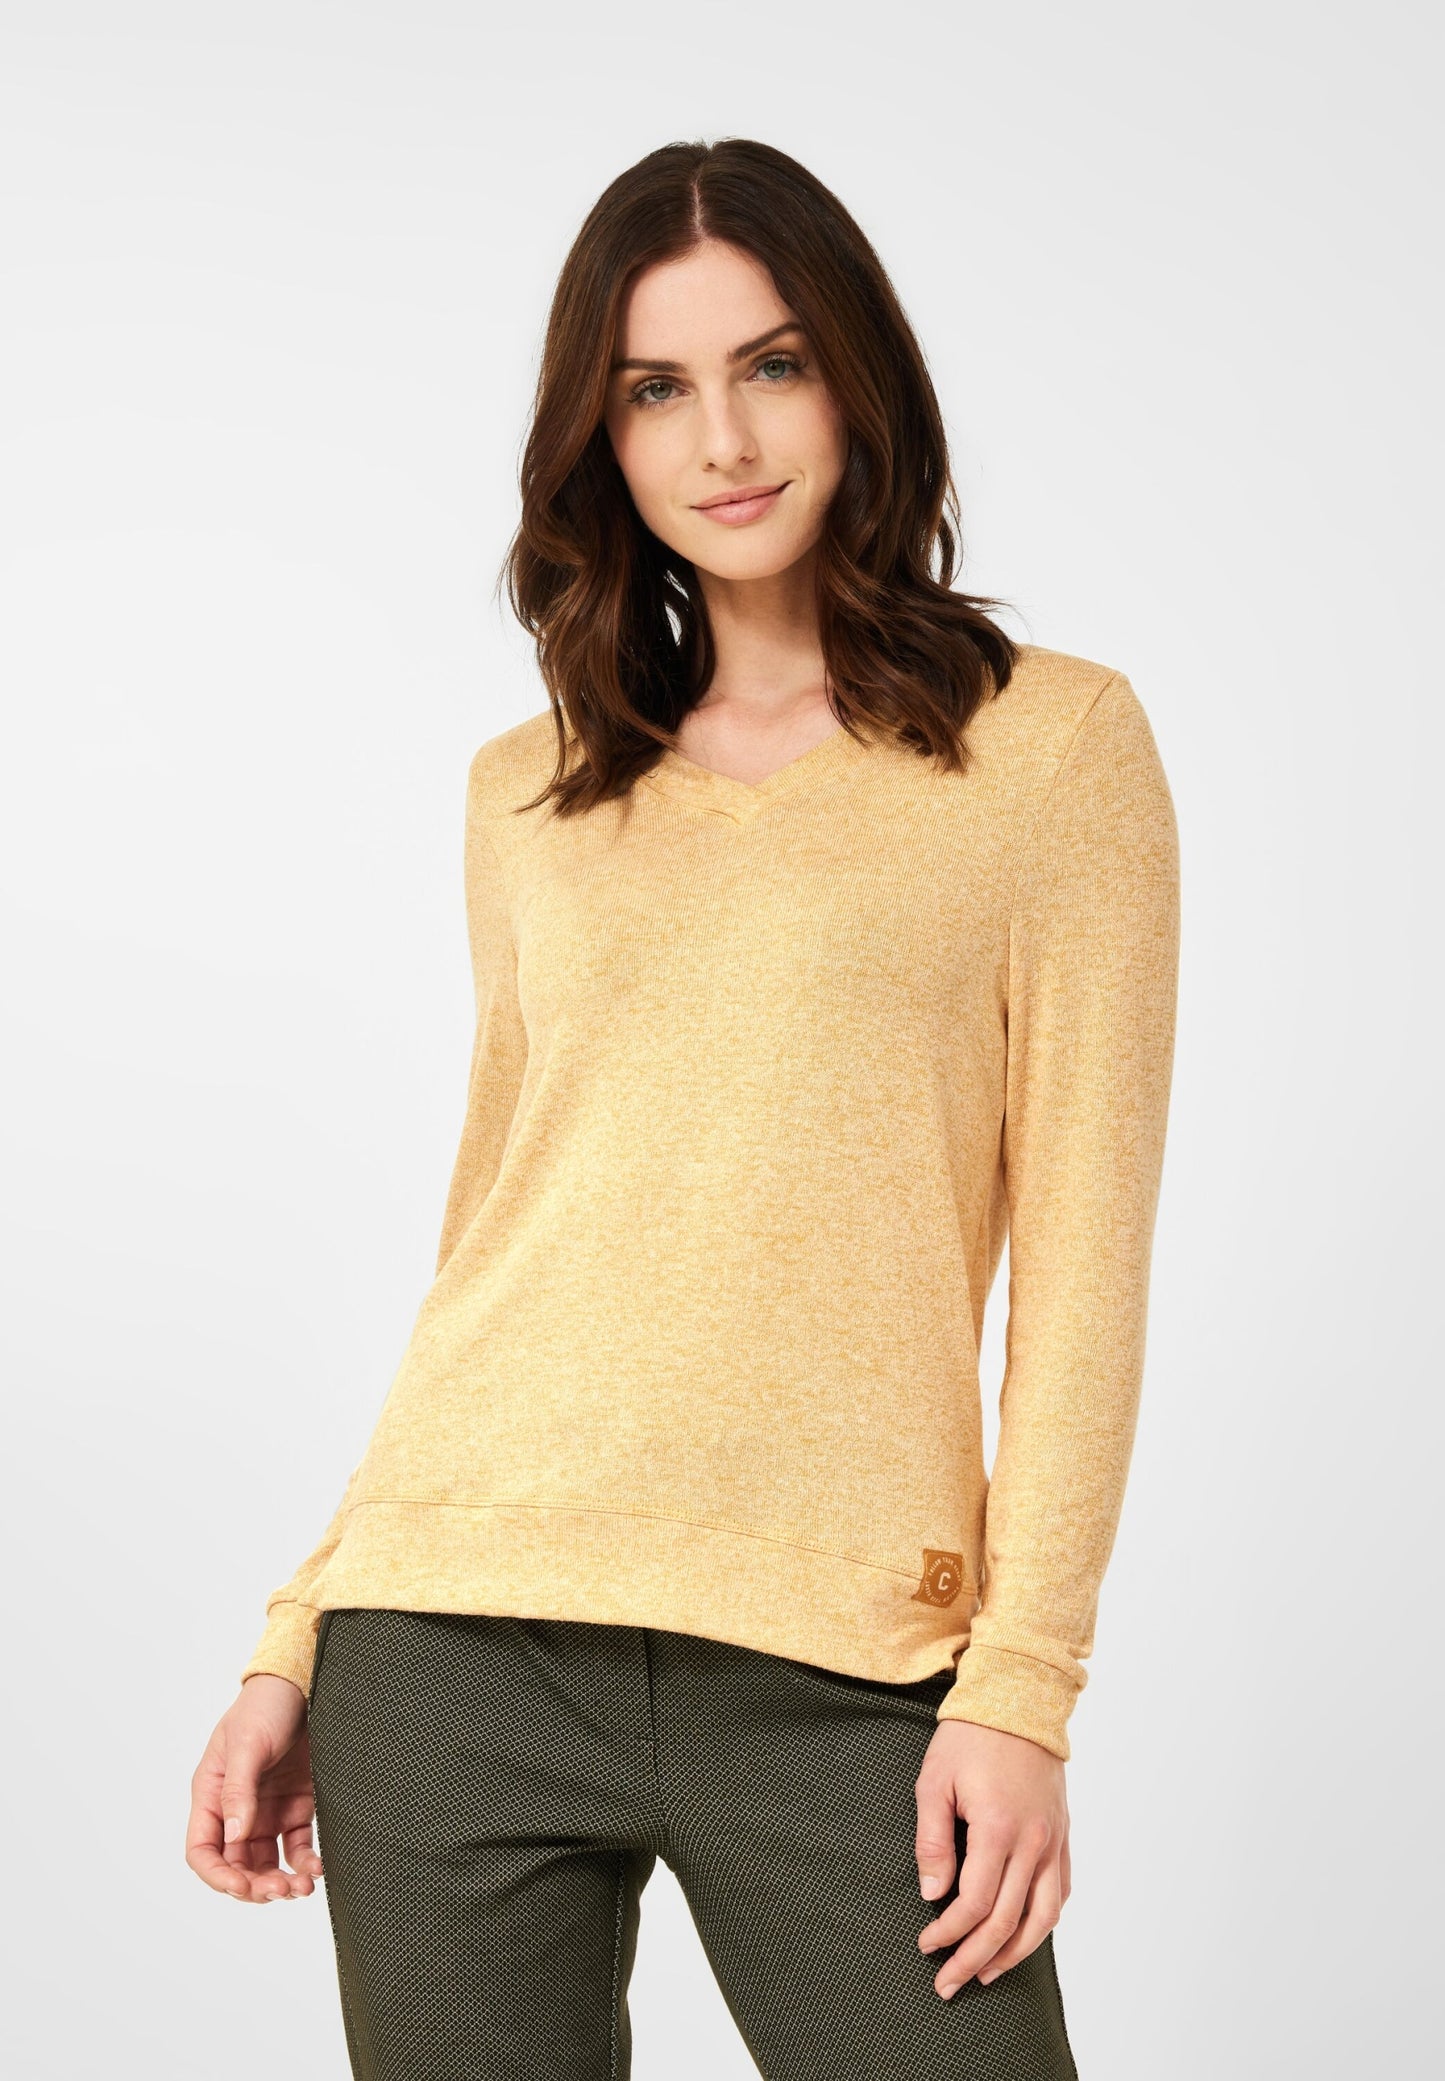 Long-sleeved shirt in plain color